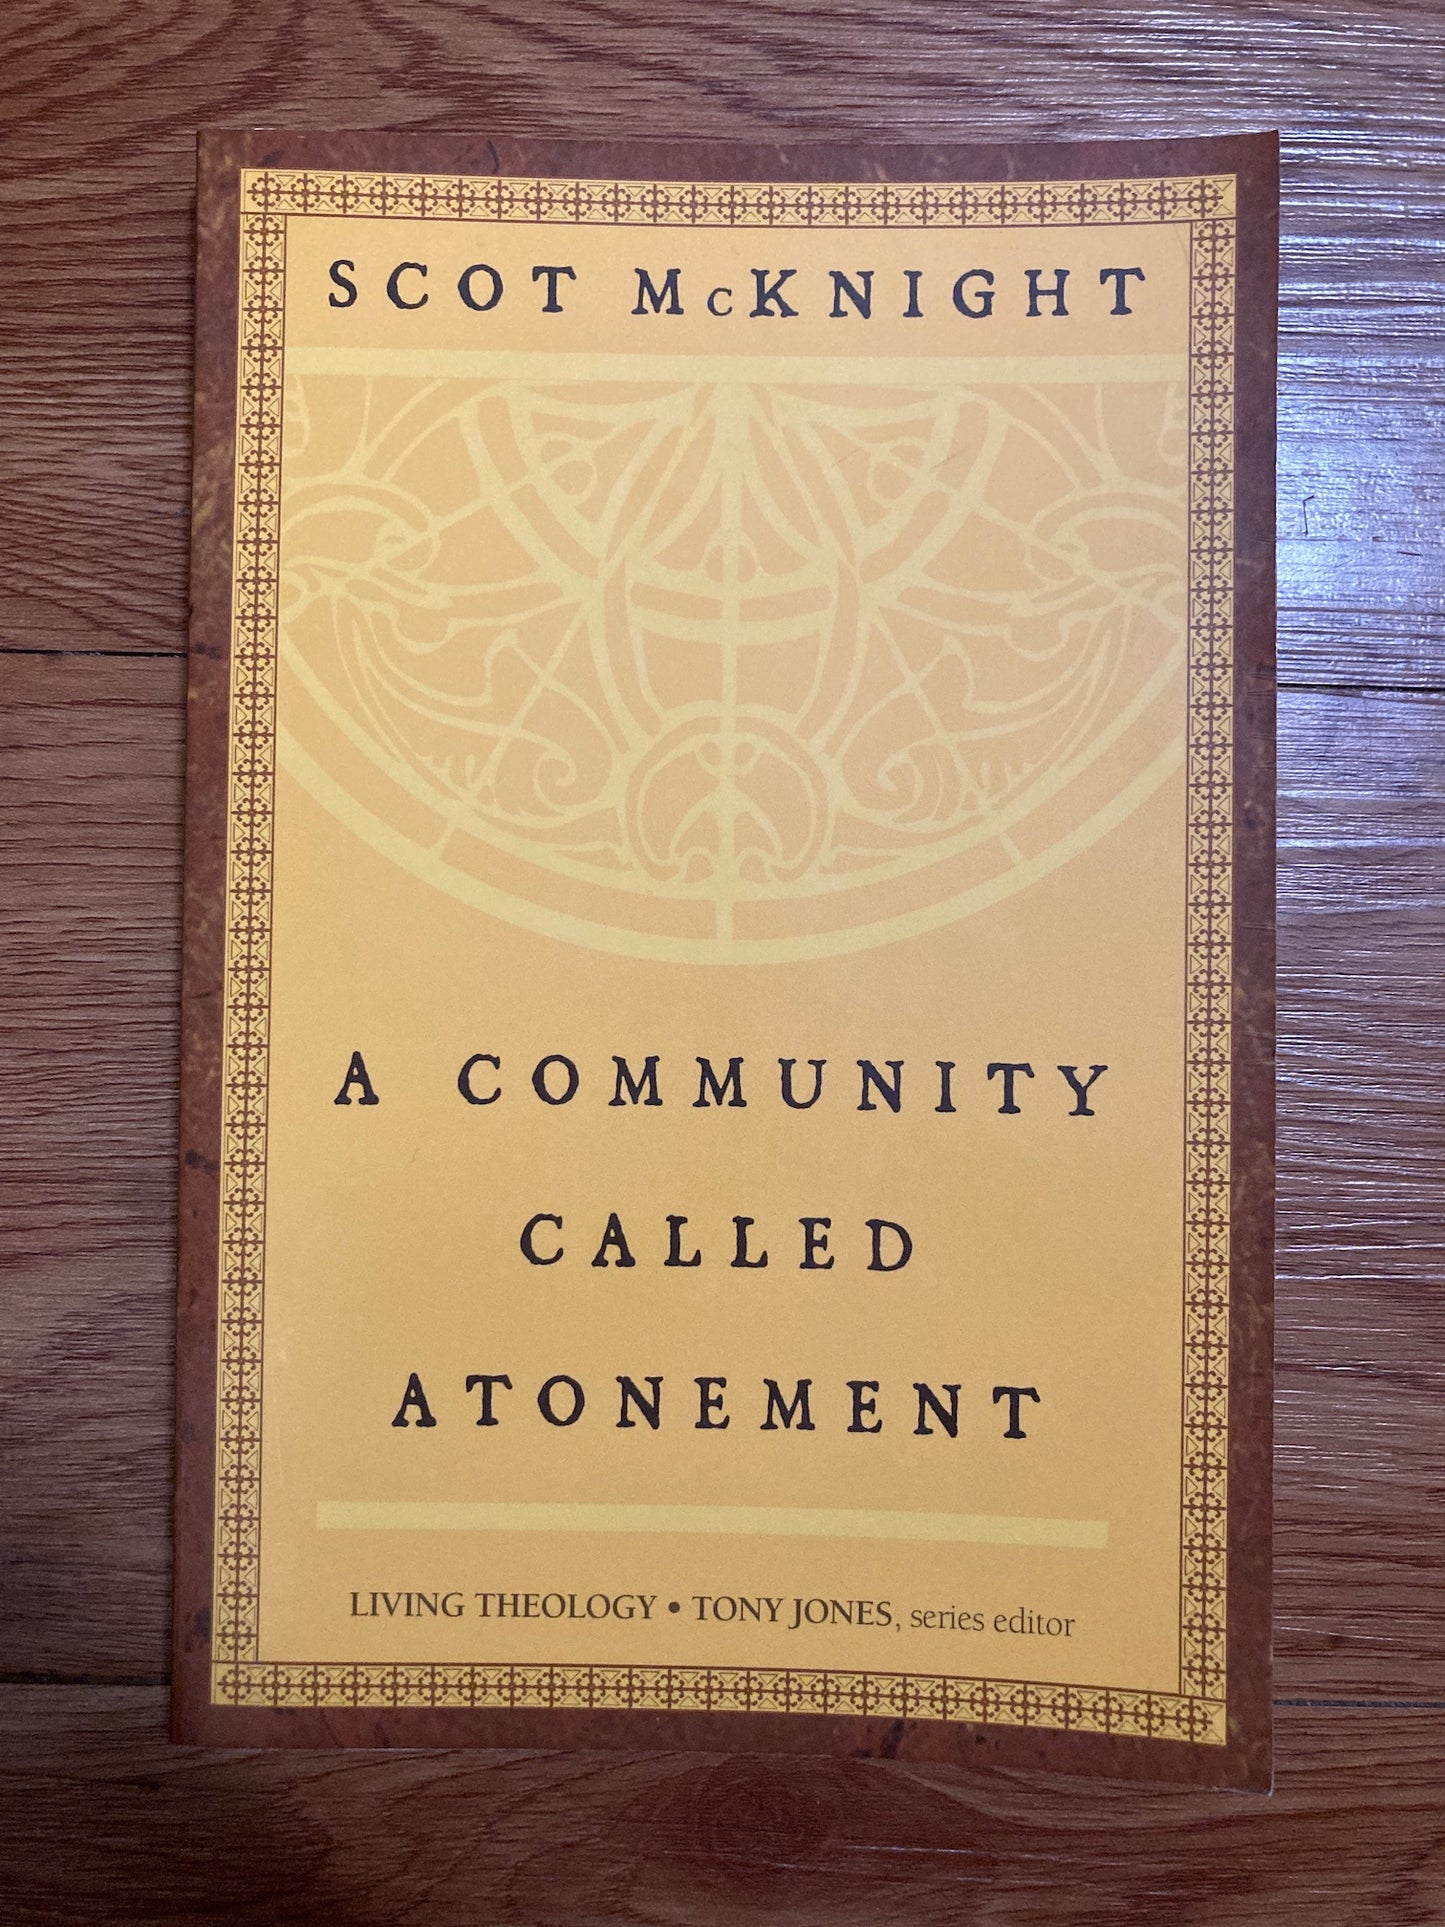 A Community Called Atonement (Living Theology)